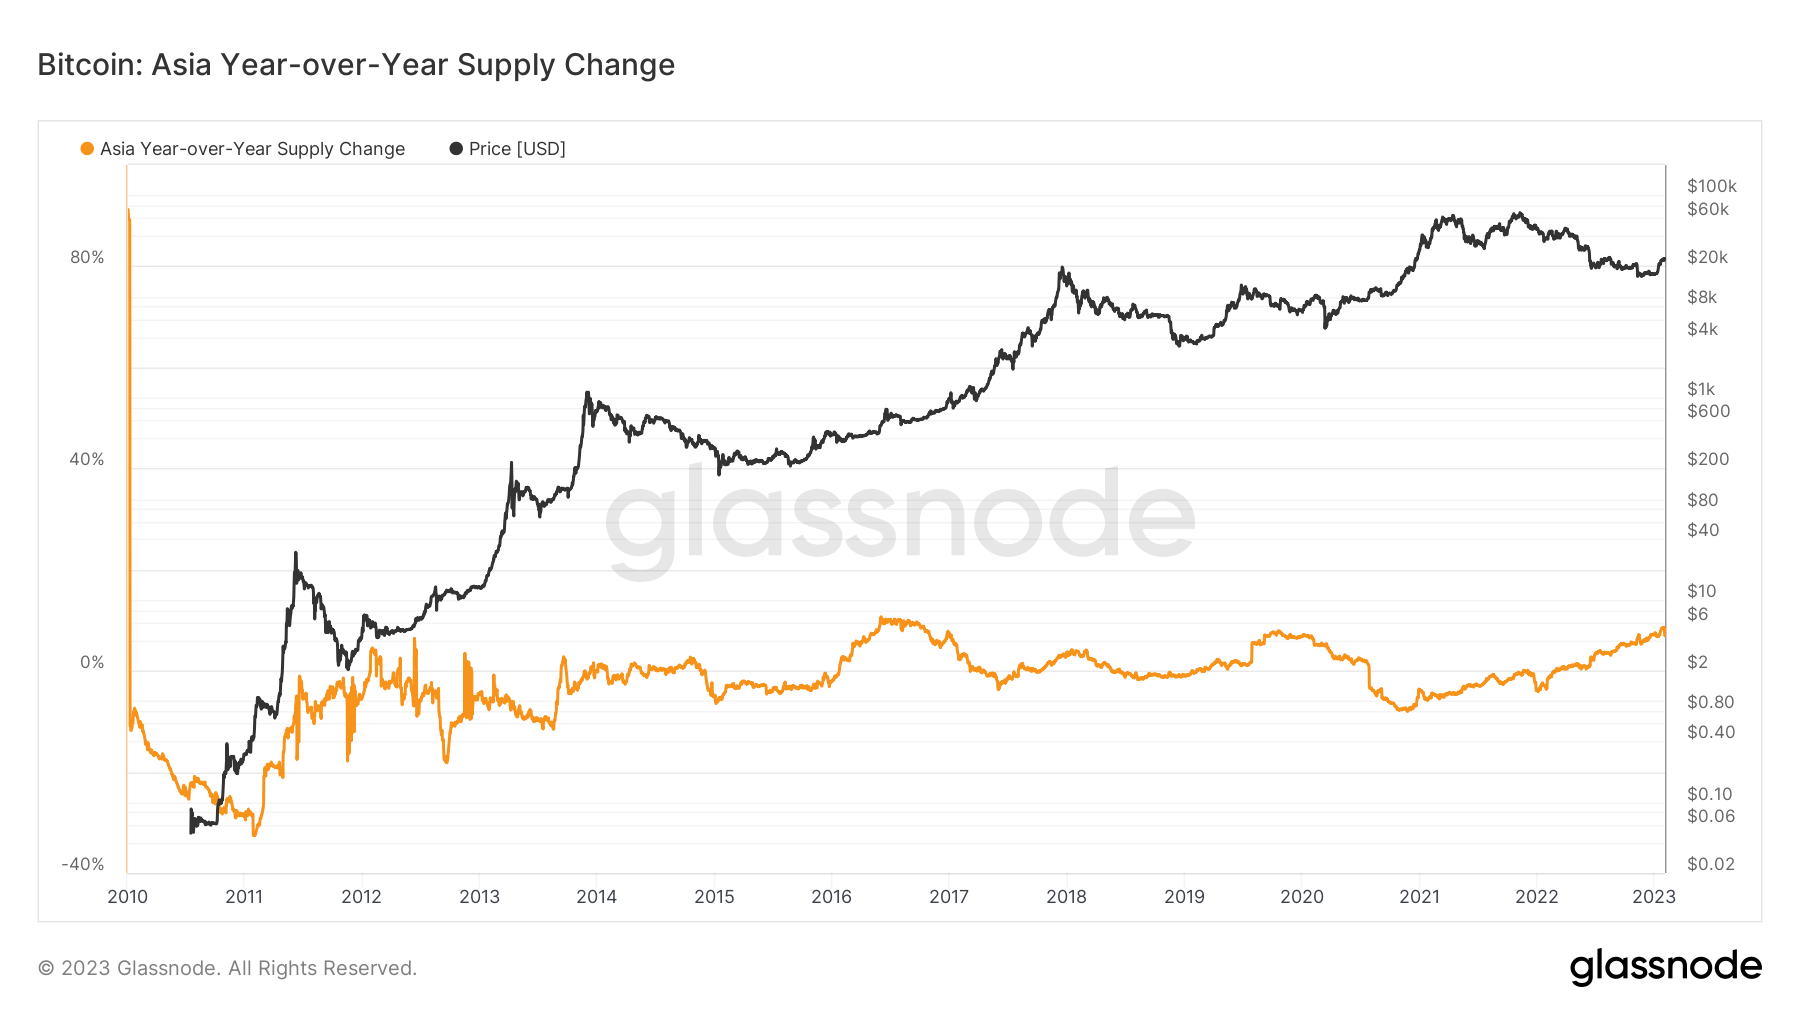 Year over year BTC supply change for Asia (Source: Glassnode)